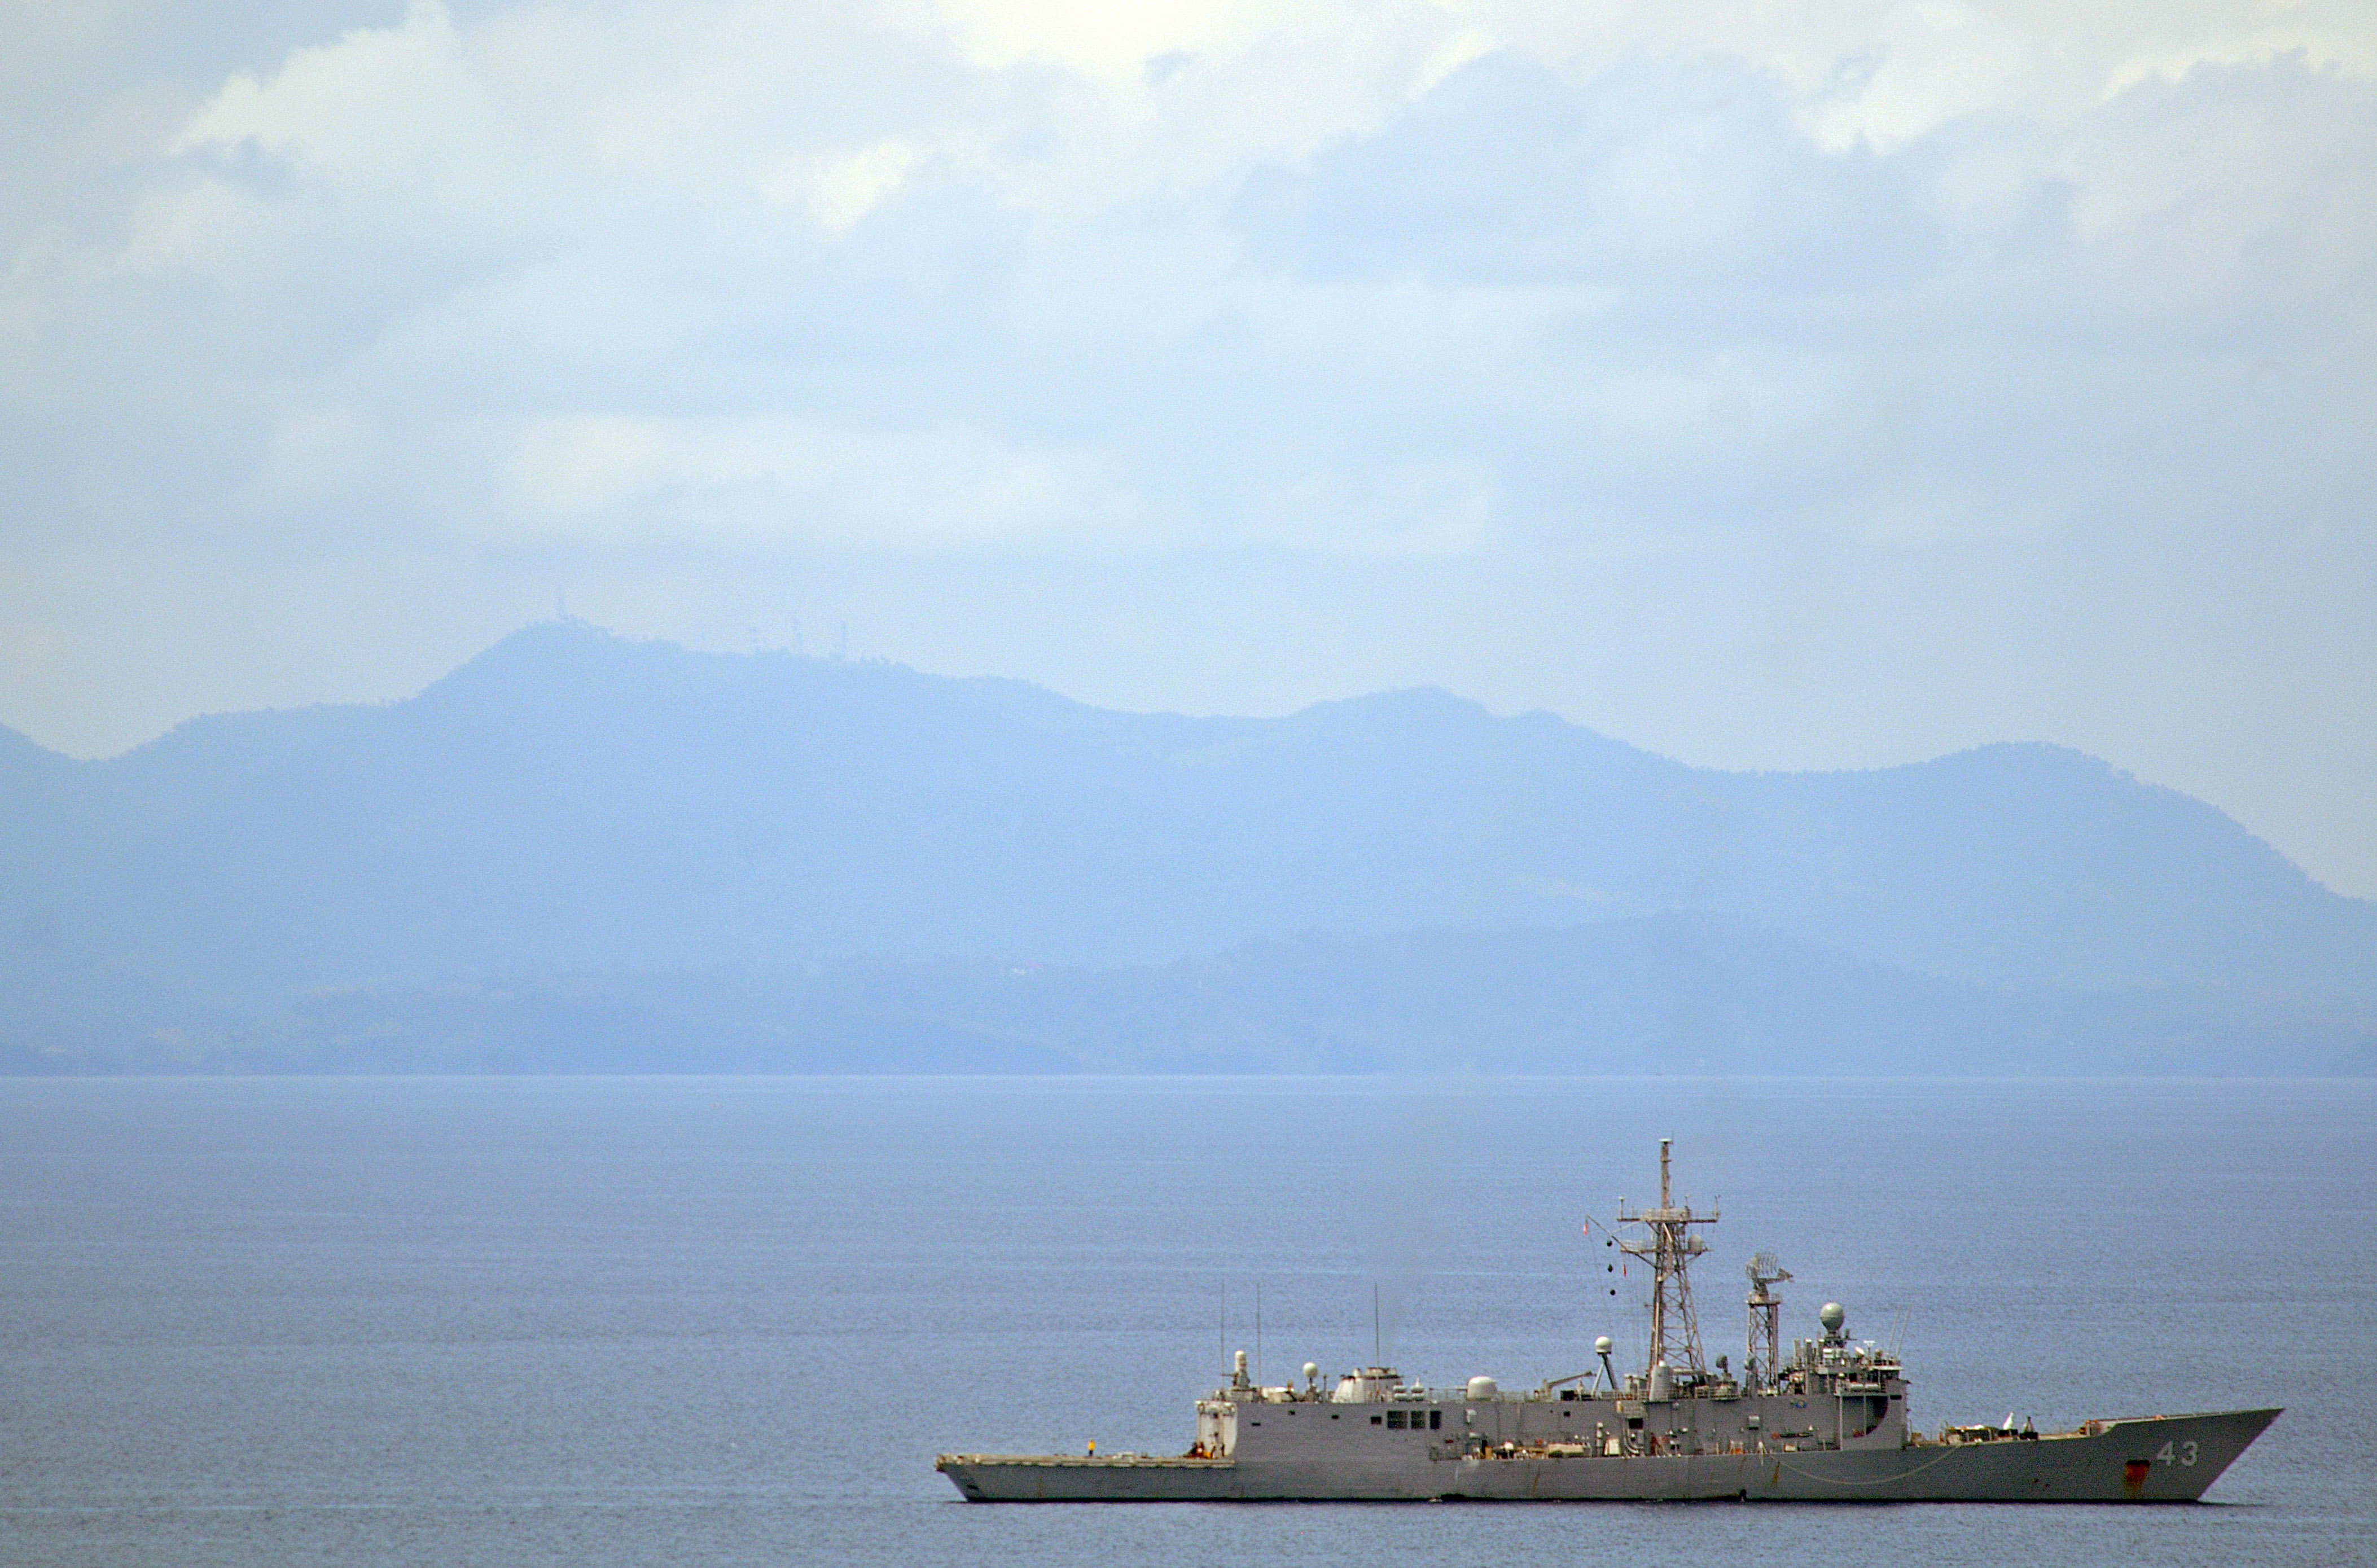 USS Thach (FFG 43), assigned to the Ronald Reagan Carrier Strike Group, transits the Sulu Sea off the coast of Iloilo, Philippines, June 30, 2008, in support of humanitarian aid missions in the area 080630-N-HX866-015